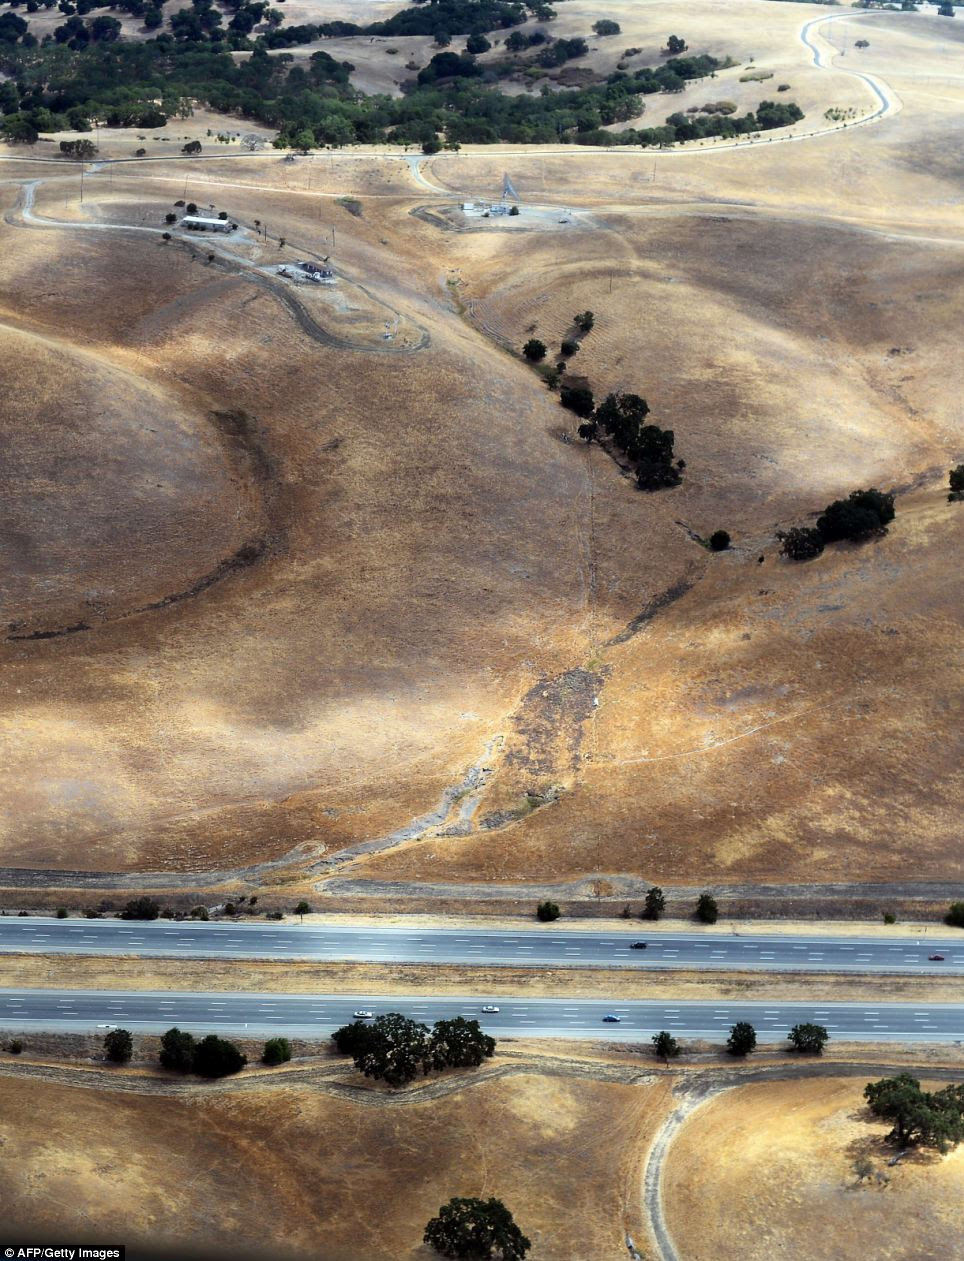 The Obama administration says it has designated more than $50 million in drought-related aid for California. Projects include supporting climate-change research hubs to seek ways to ease the impact